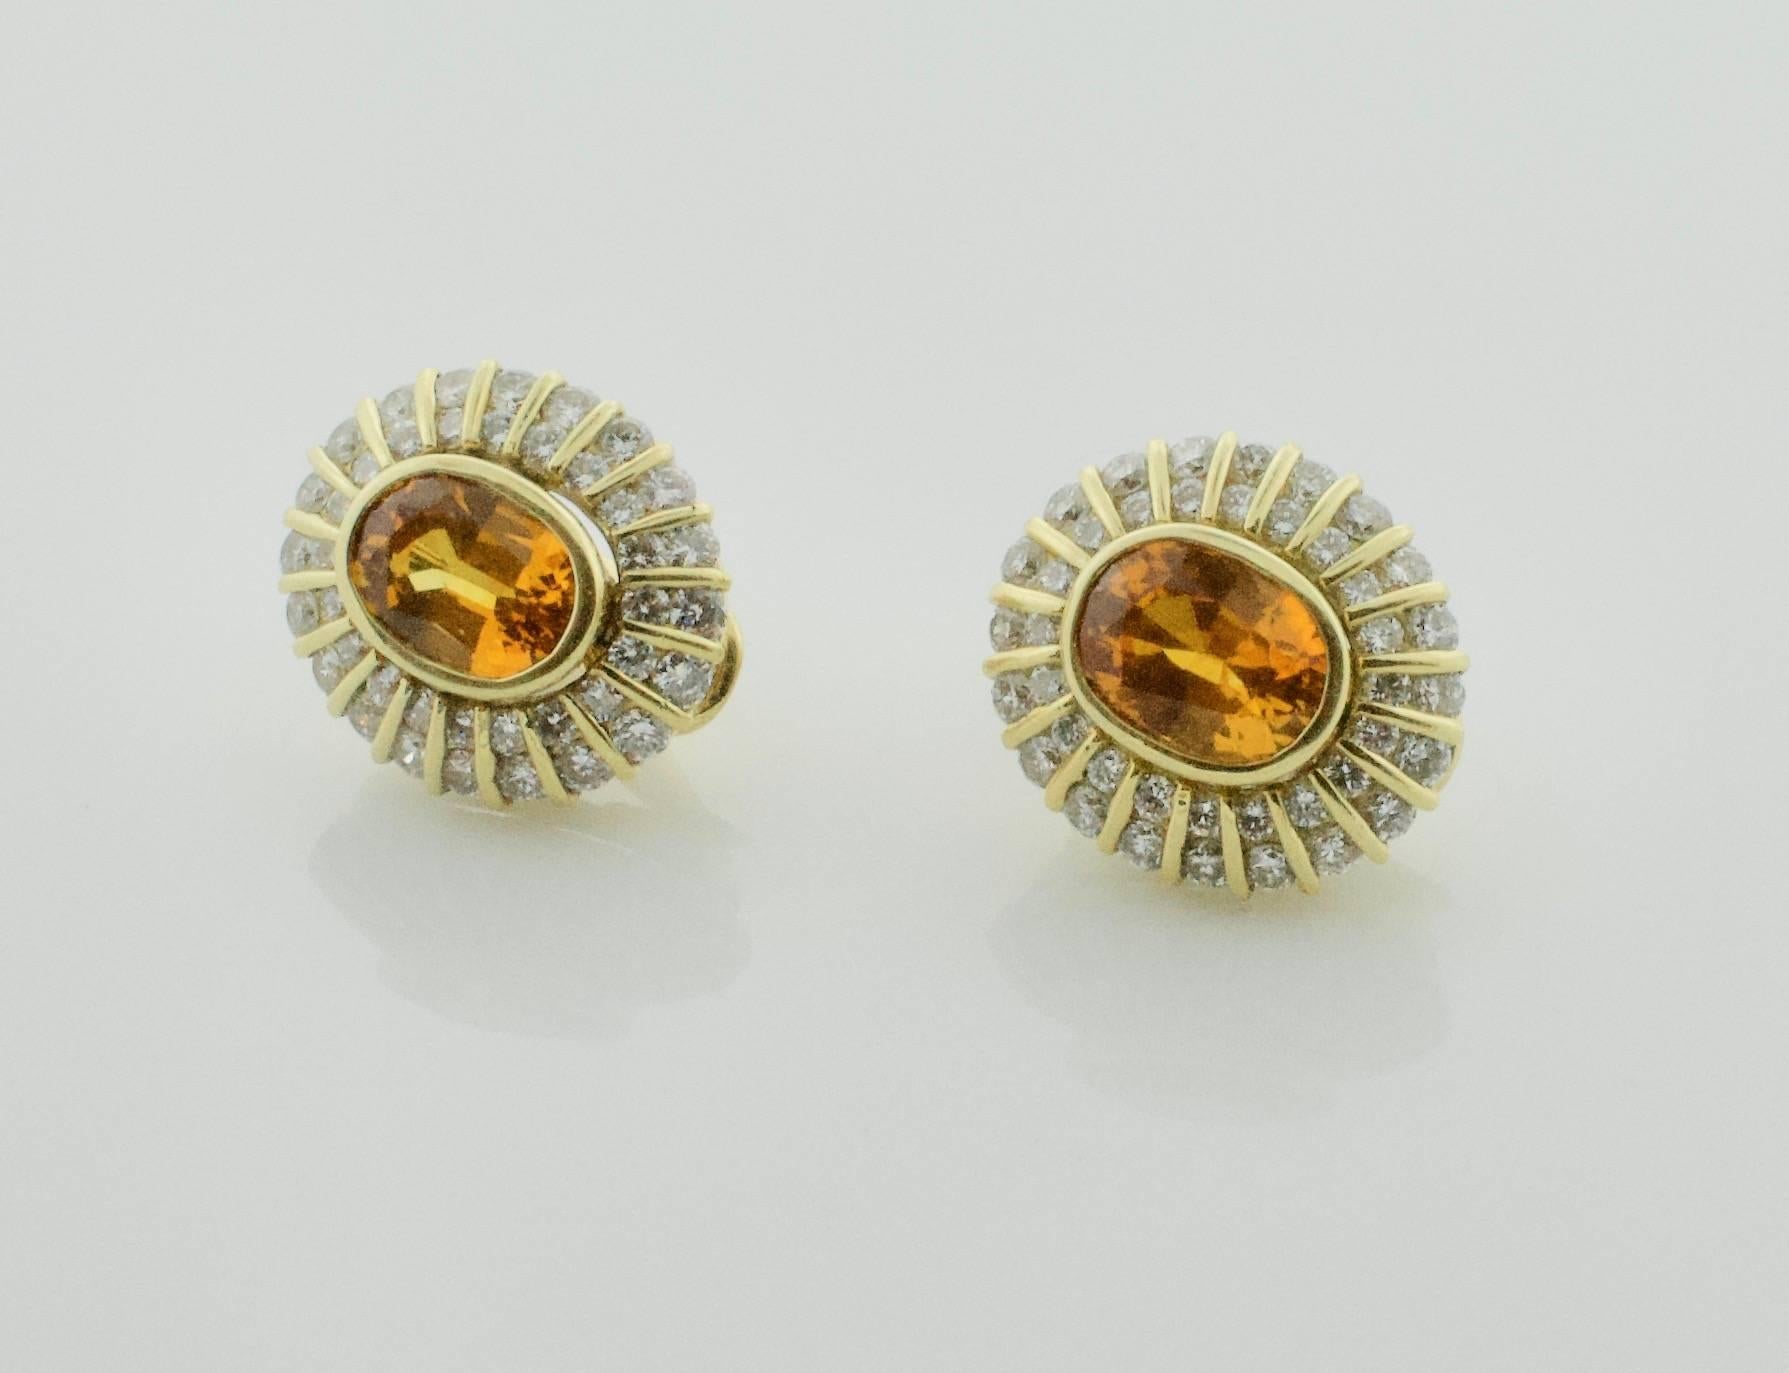 Golden Sapphire and Diamond Clip Earrings in 18k
Two Matched Golden Sapphires  weighing 5.20 carats approximately [bright and vibrant with no imperfections visible to the naked eye]
Eighty Round Brilliant Cut Diamonds weighing 2.60 carats